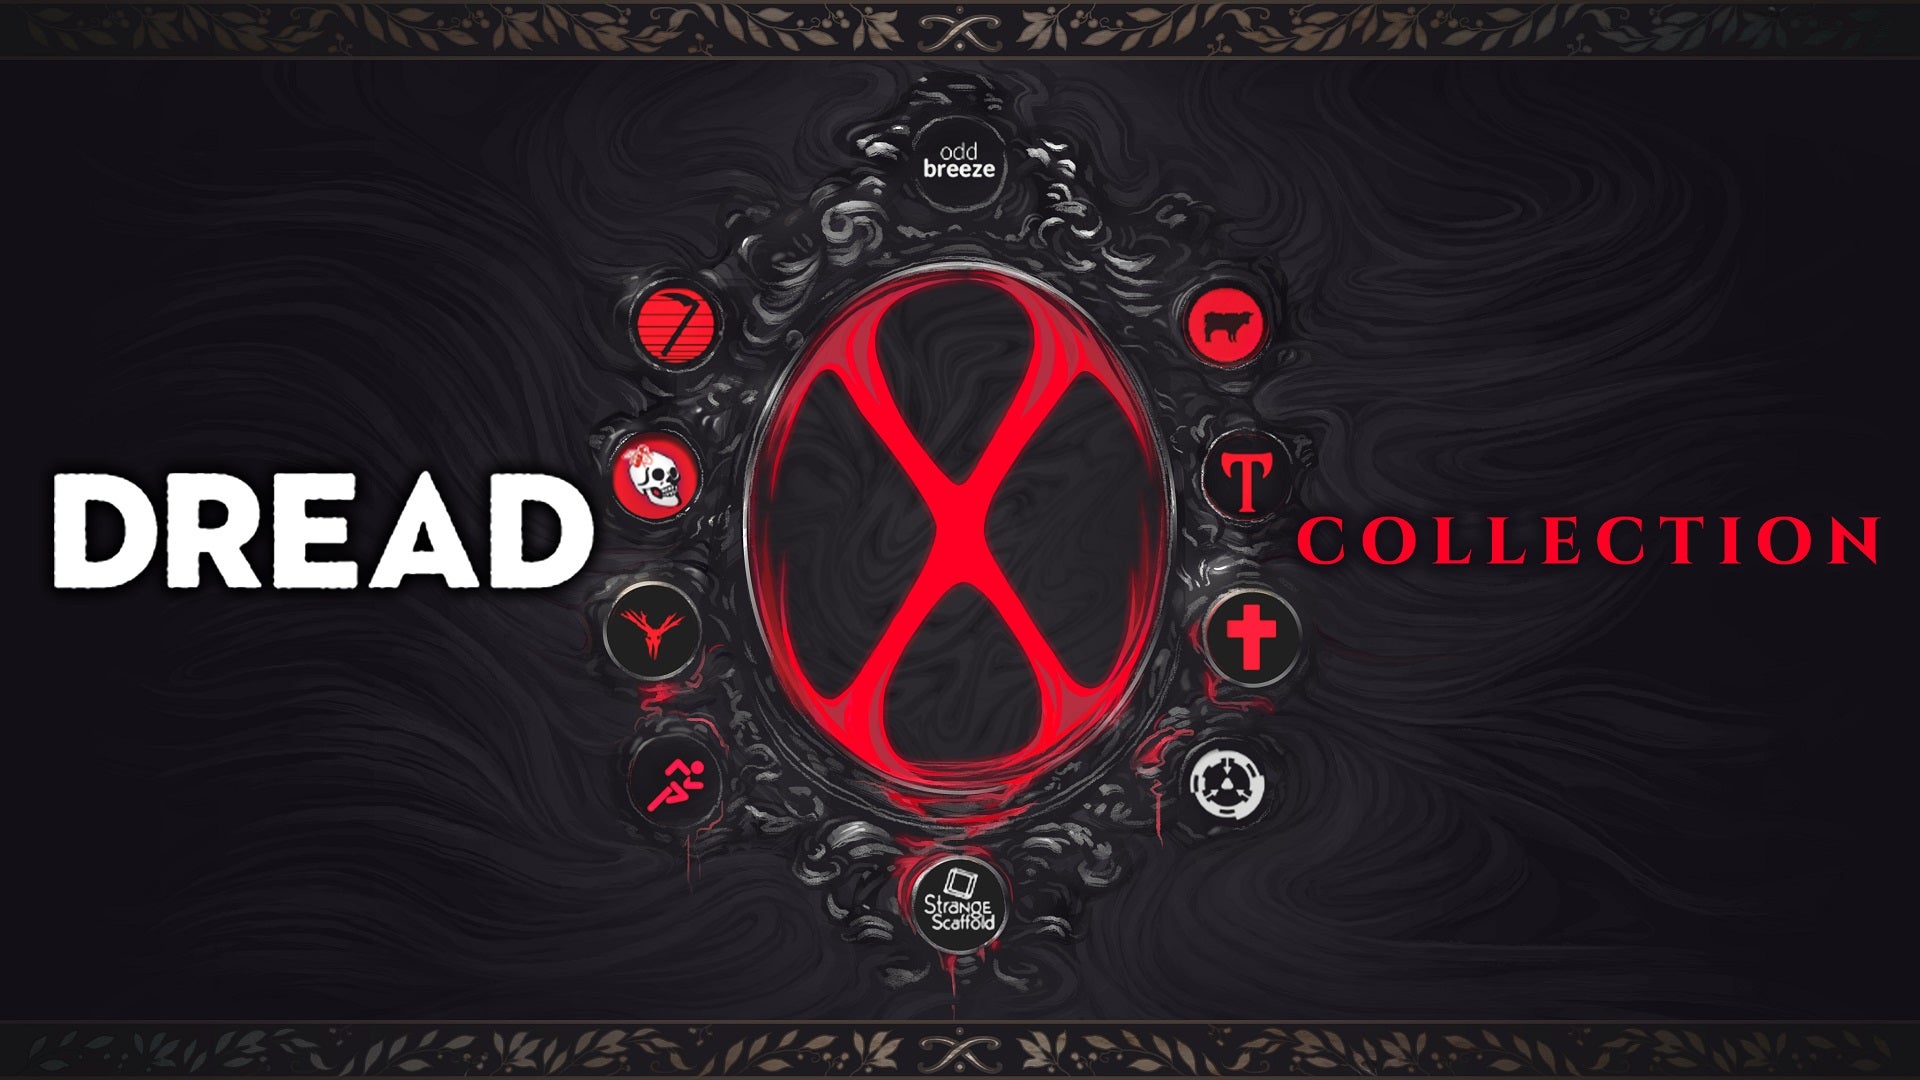 The Steam banner for the original Dread X Collection, featuring developer logos.